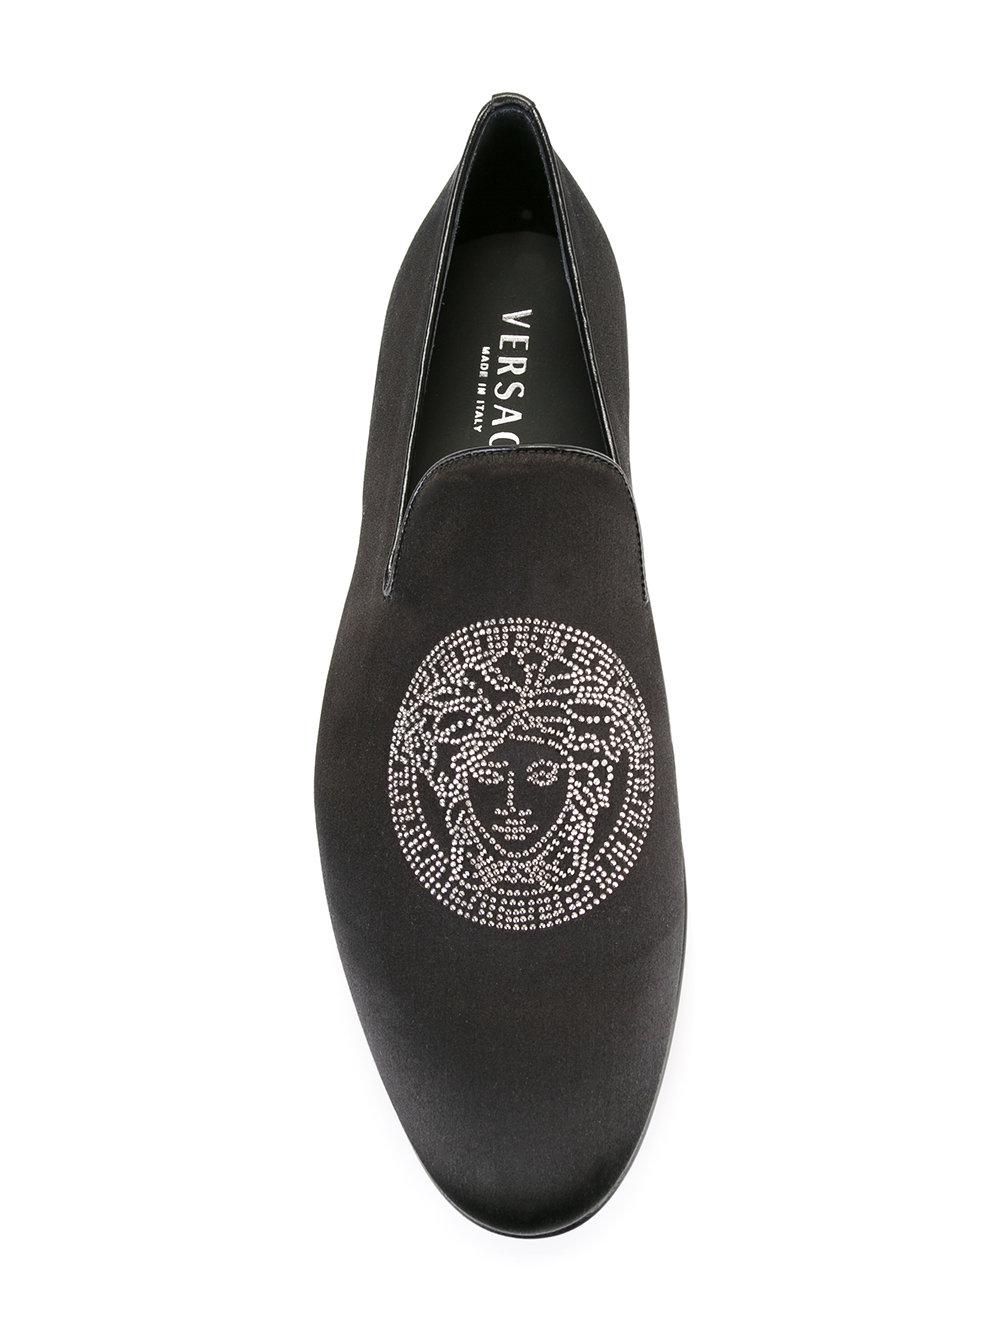 Versace Leather Crystal Medusa Head Loafers in Black for Men - Lyst